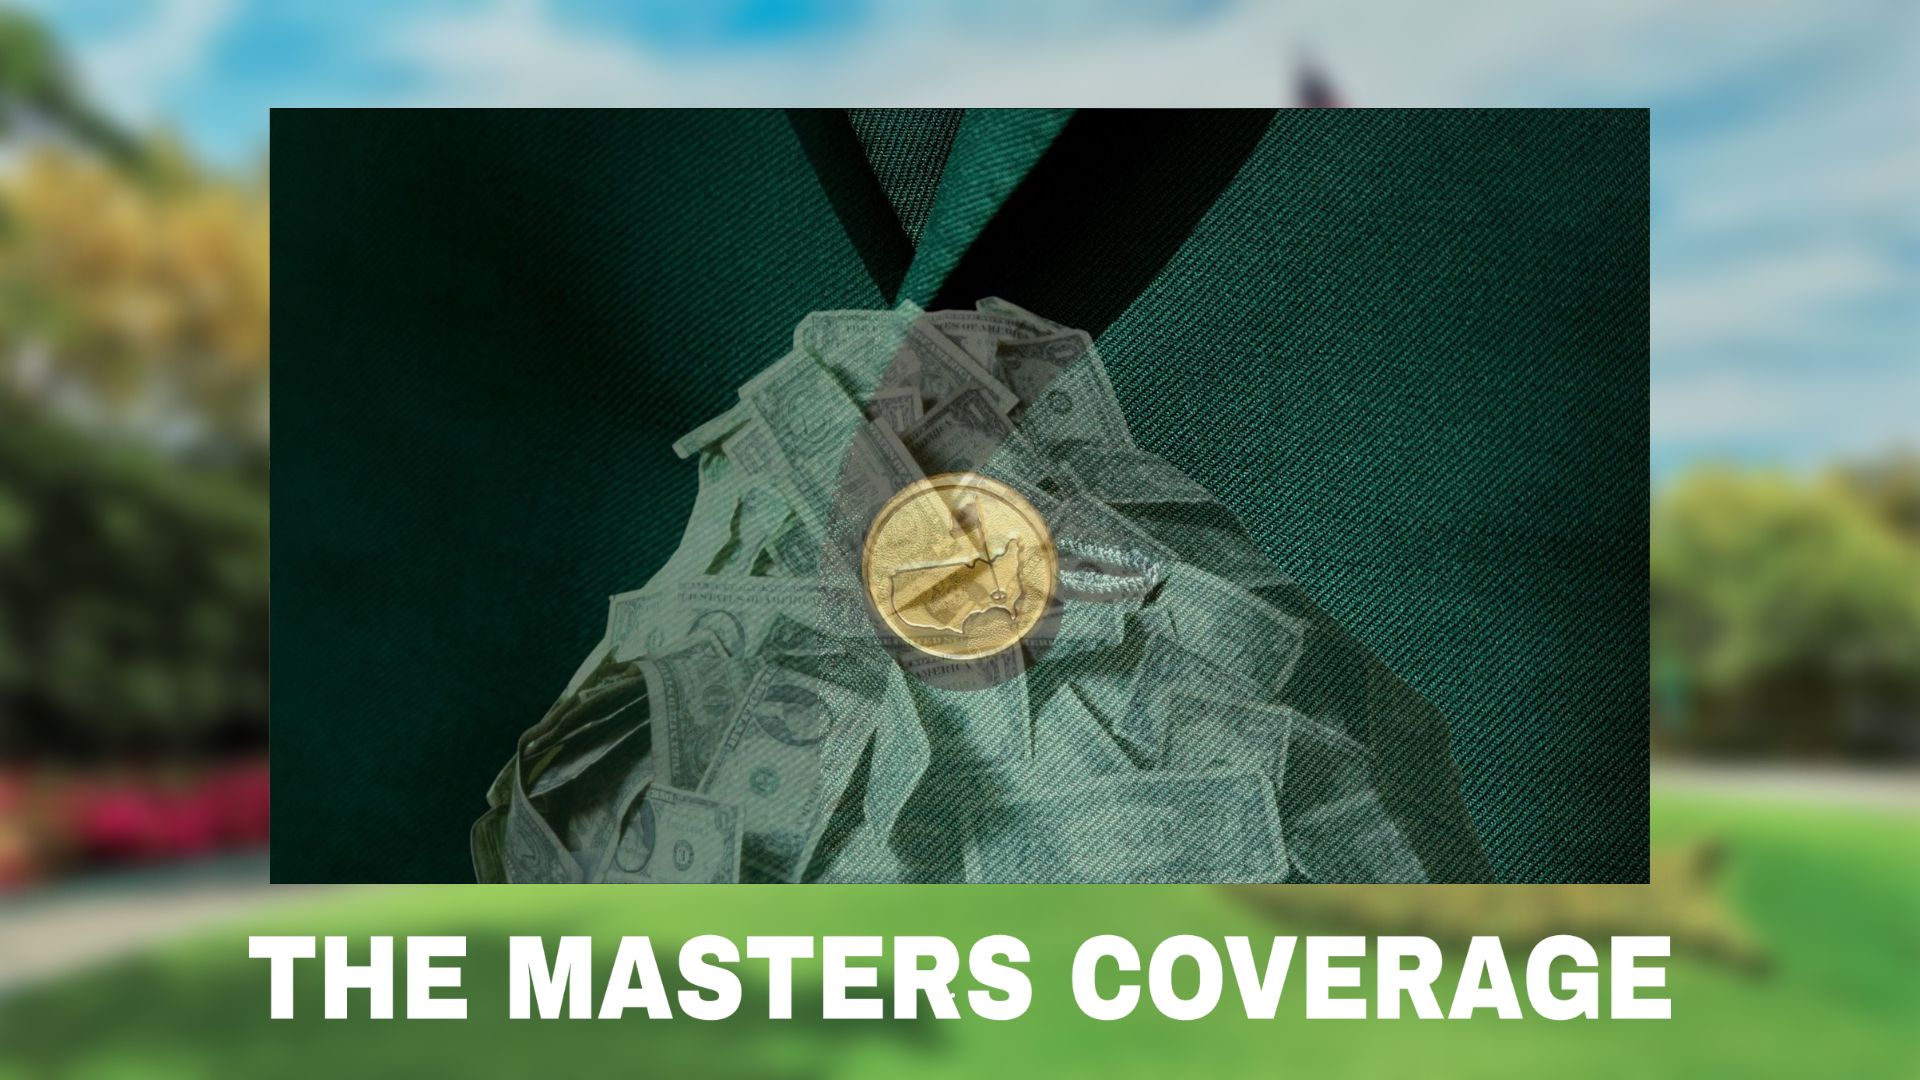 The Masters Medal